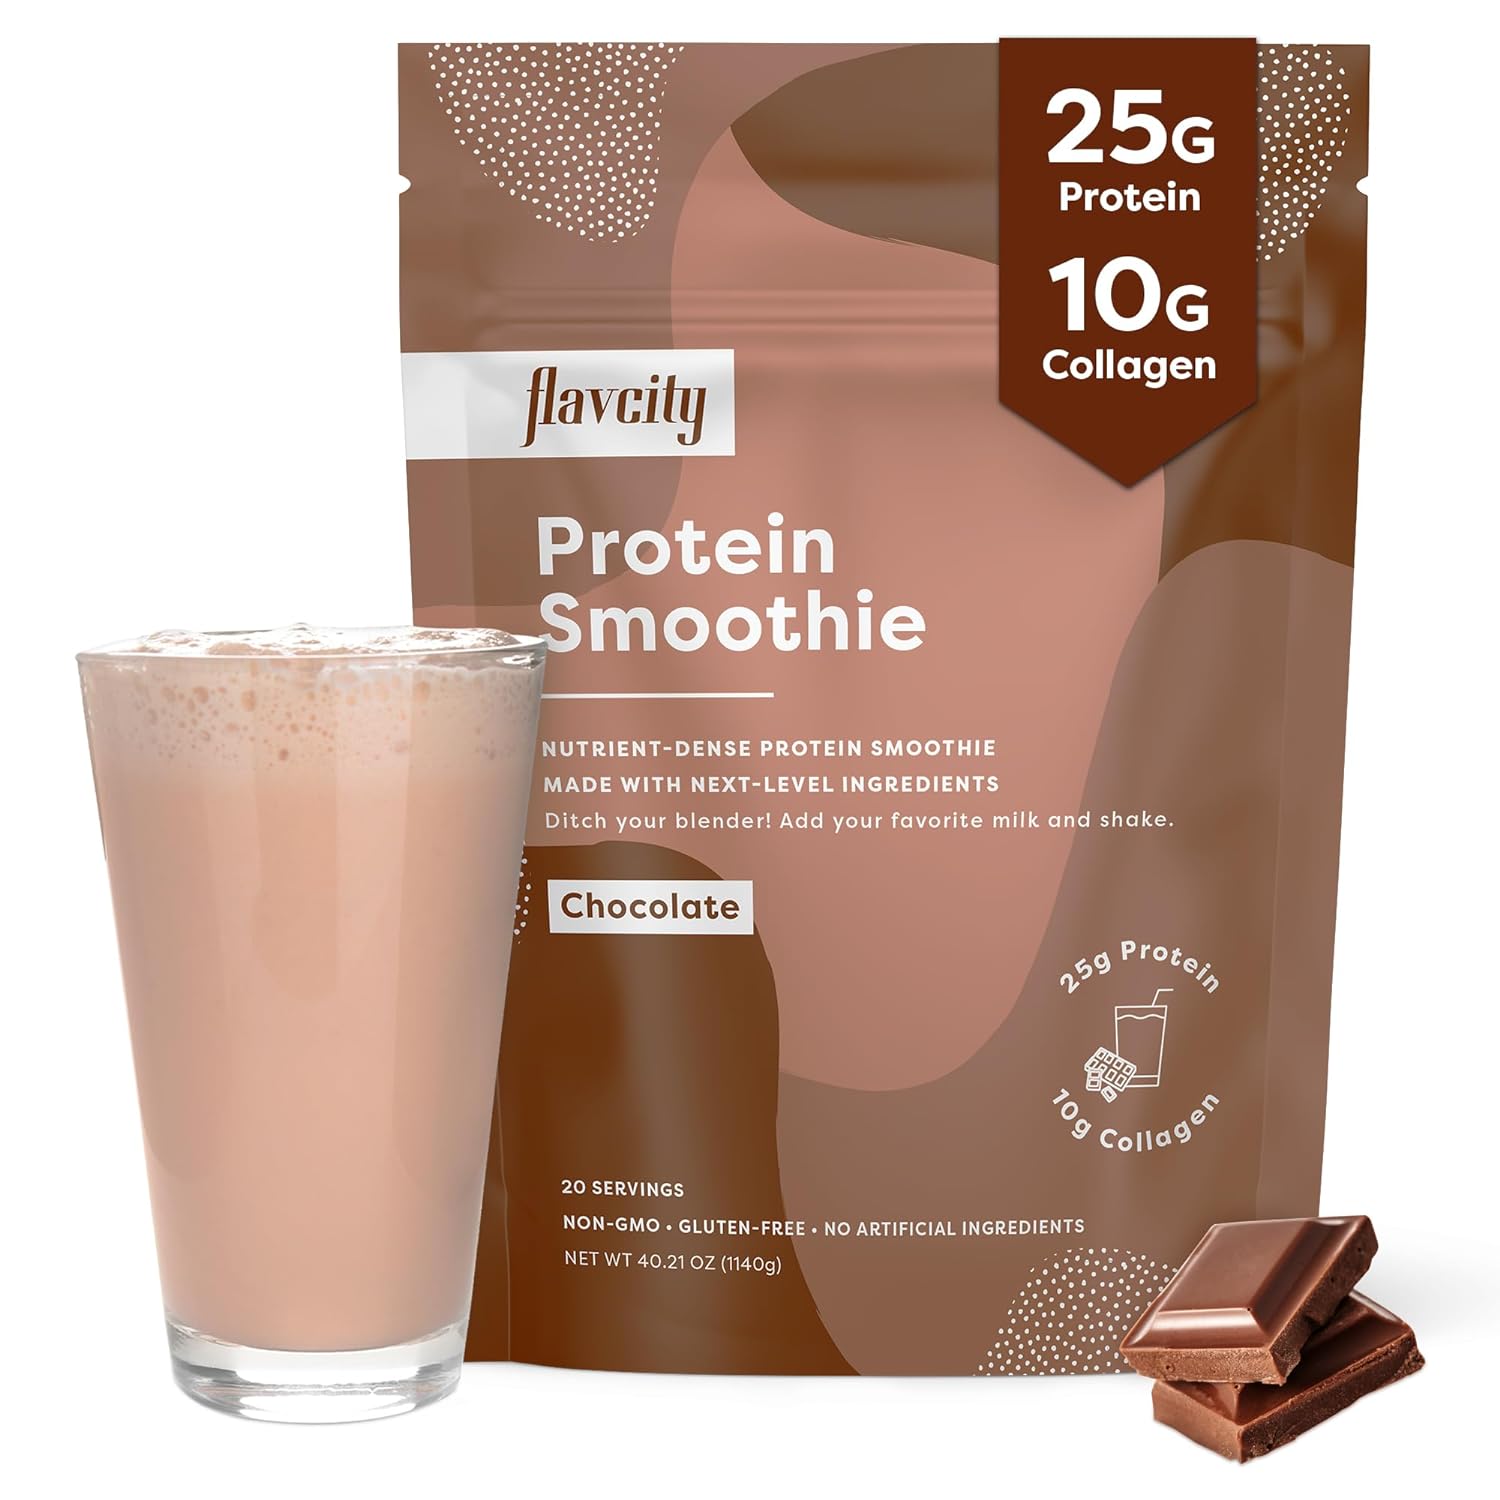 FlavCity Protein Powder Smoothie, Chocolate - 100% Grass-Fed Whey Protein Smoothie with Collagen & Organic Pea Protein (25g of Protein) - Gluten Free & No Added Sugars (37.74 oz)